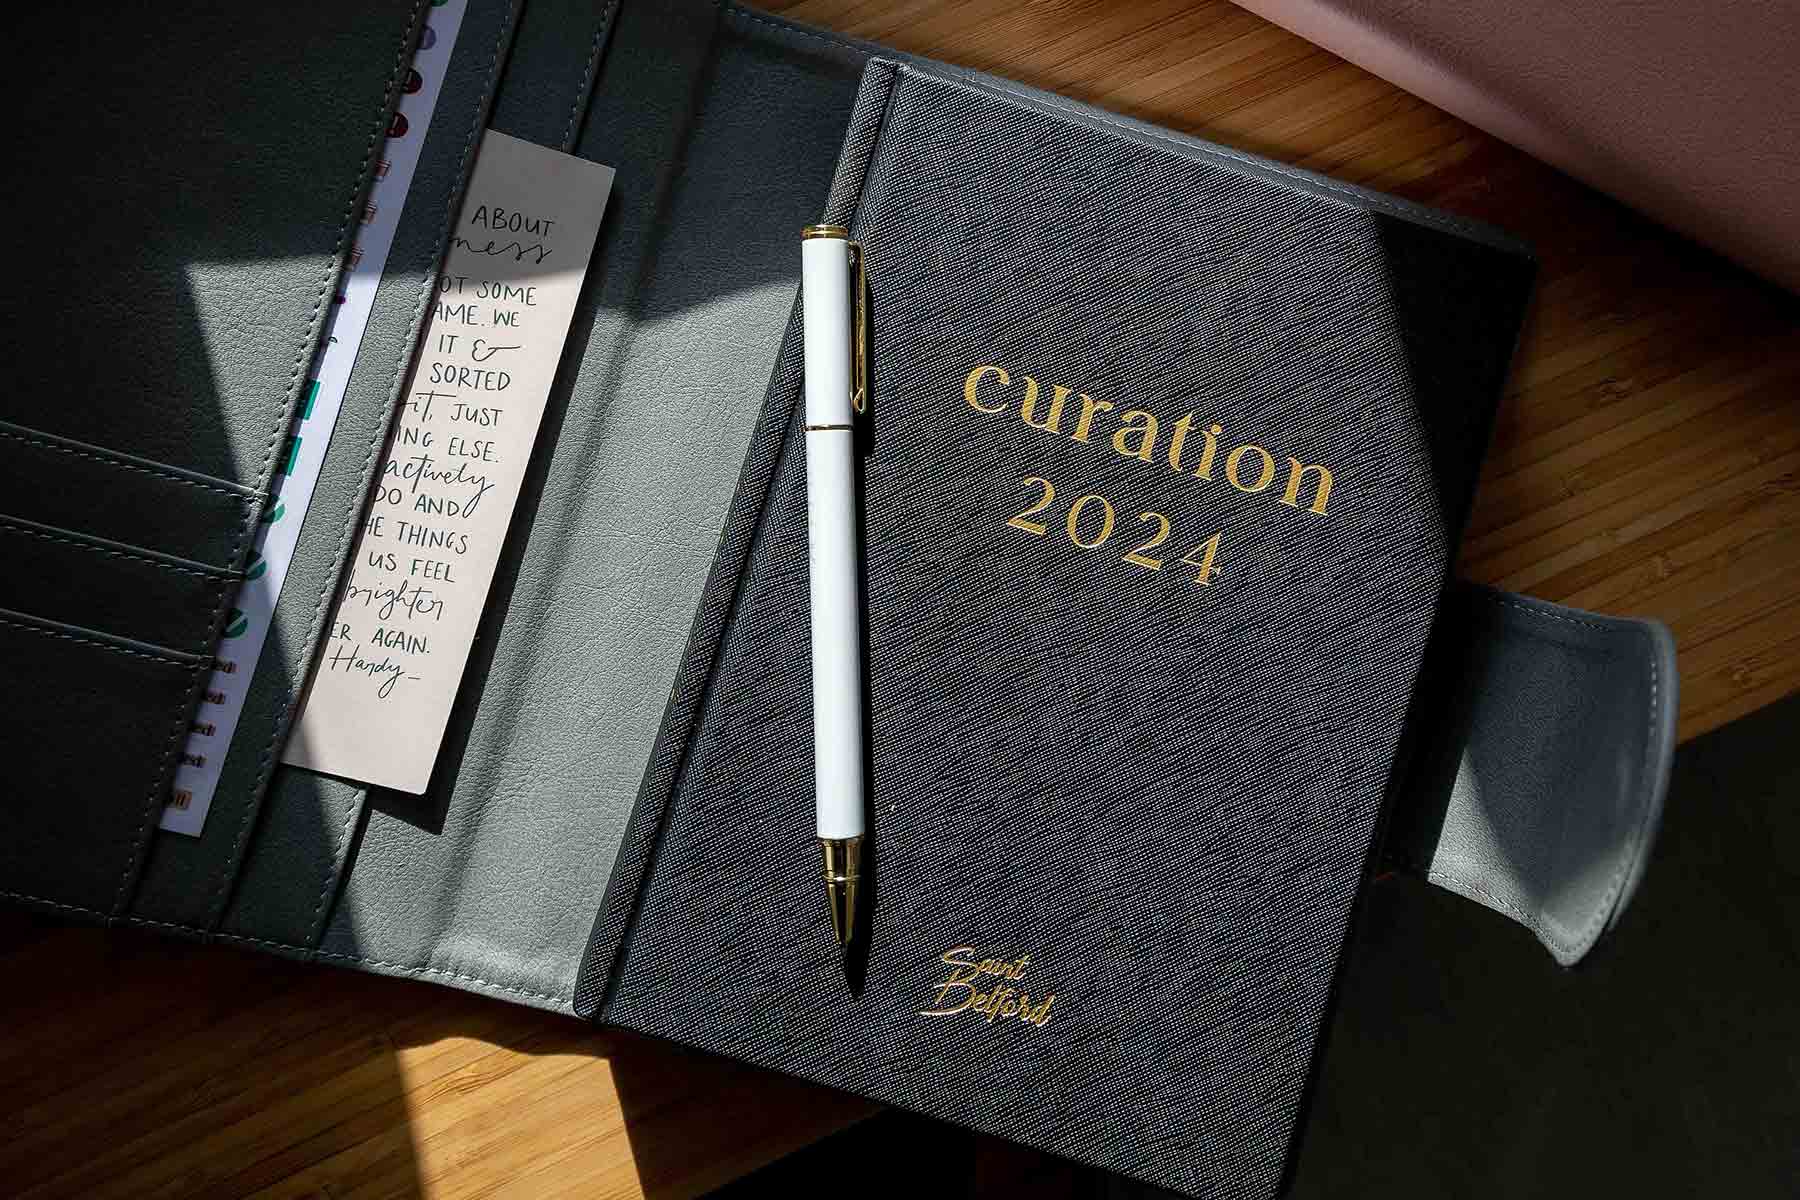 What's new with Curation 2024 Planner?